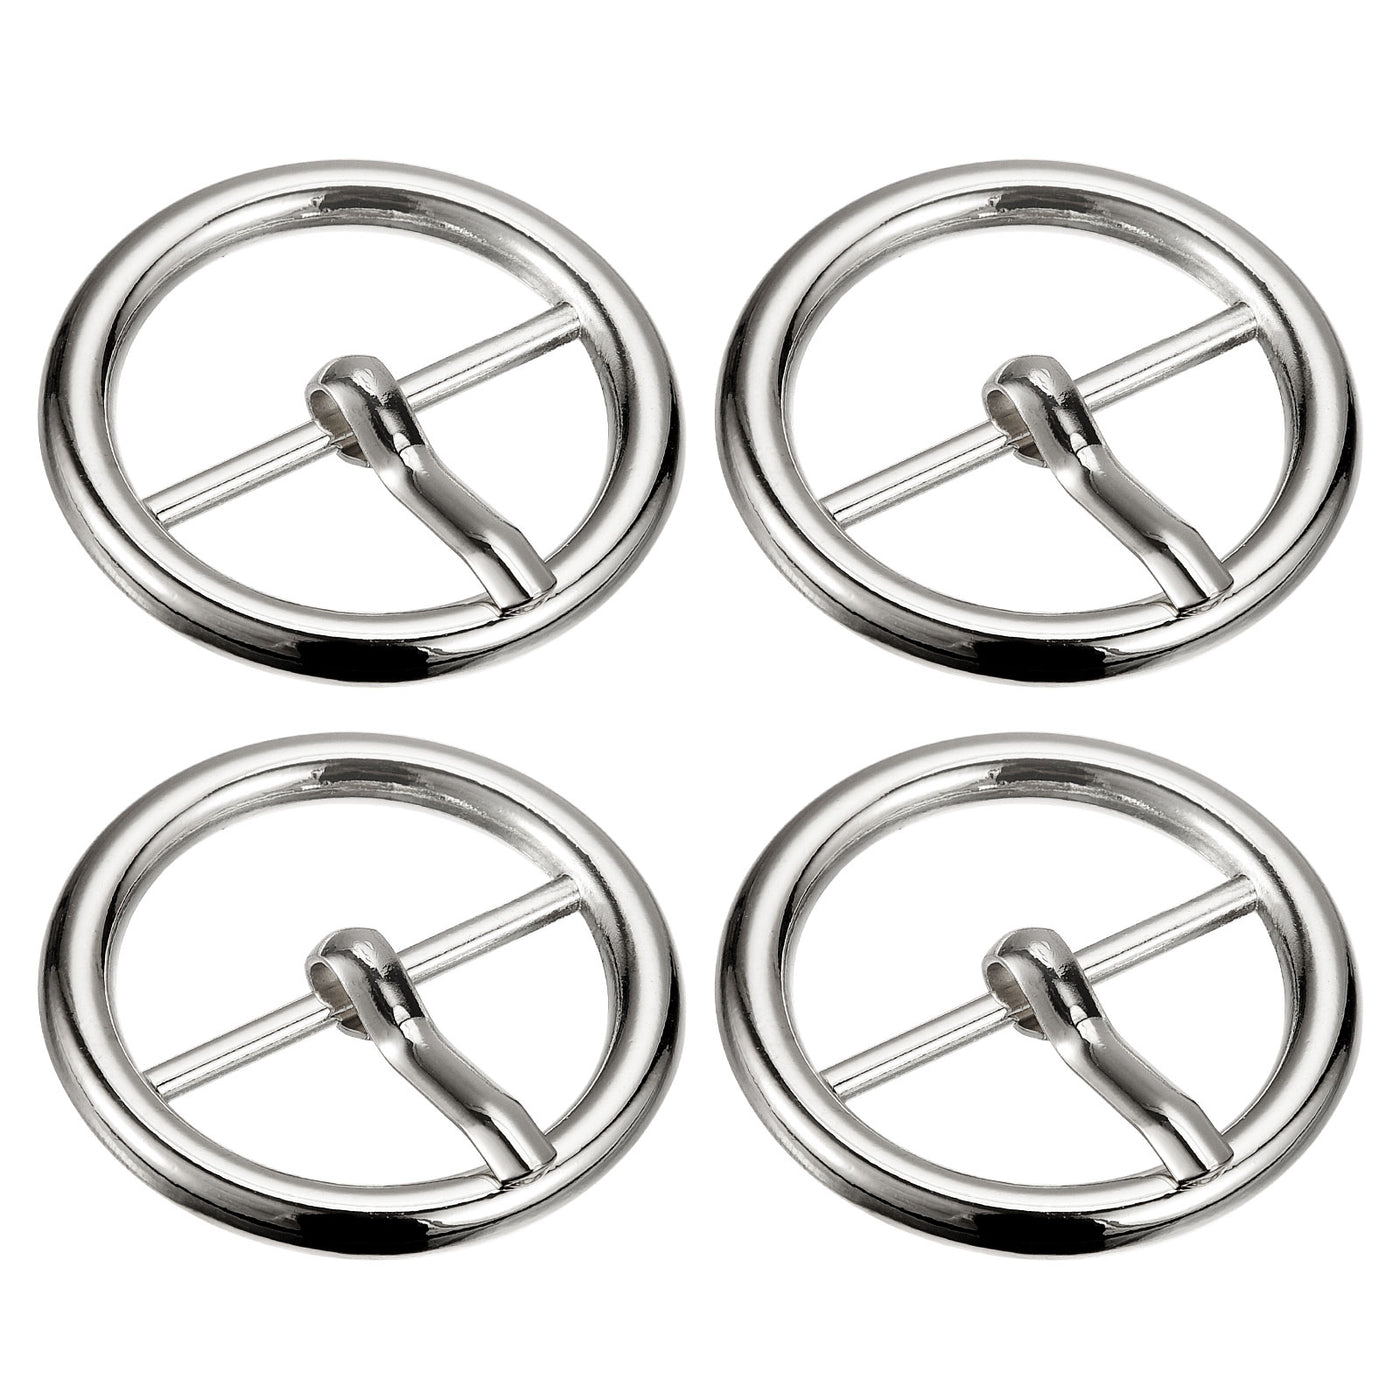 uxcell Uxcell 4Pcs 0.94" Single Prong Belt Buckle Round Center Bar Buckles for Belt, Silver